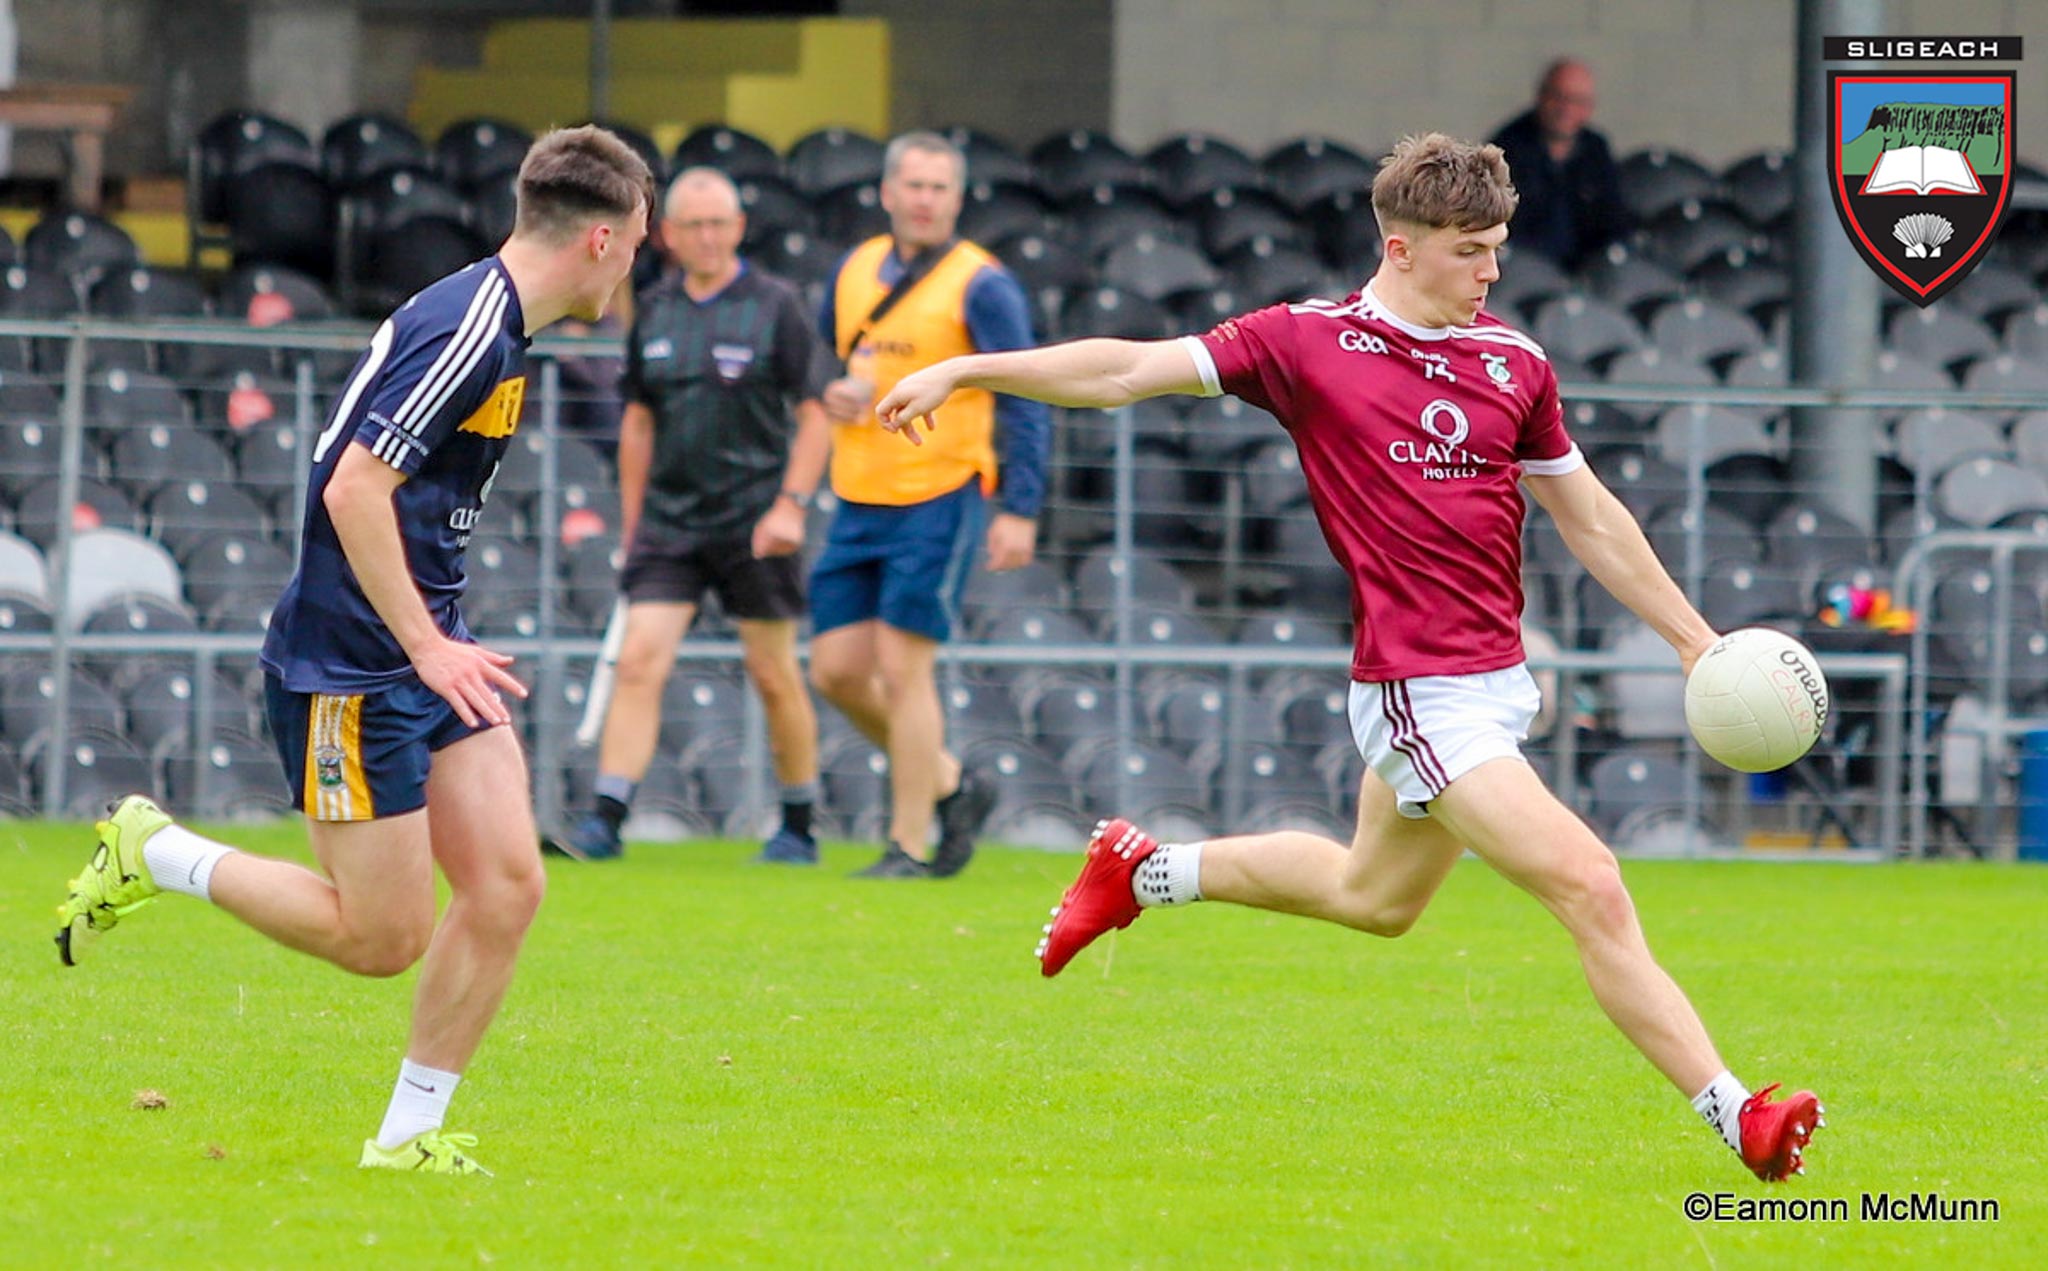 Goals are the difference as Gaels confirm semi final slot 